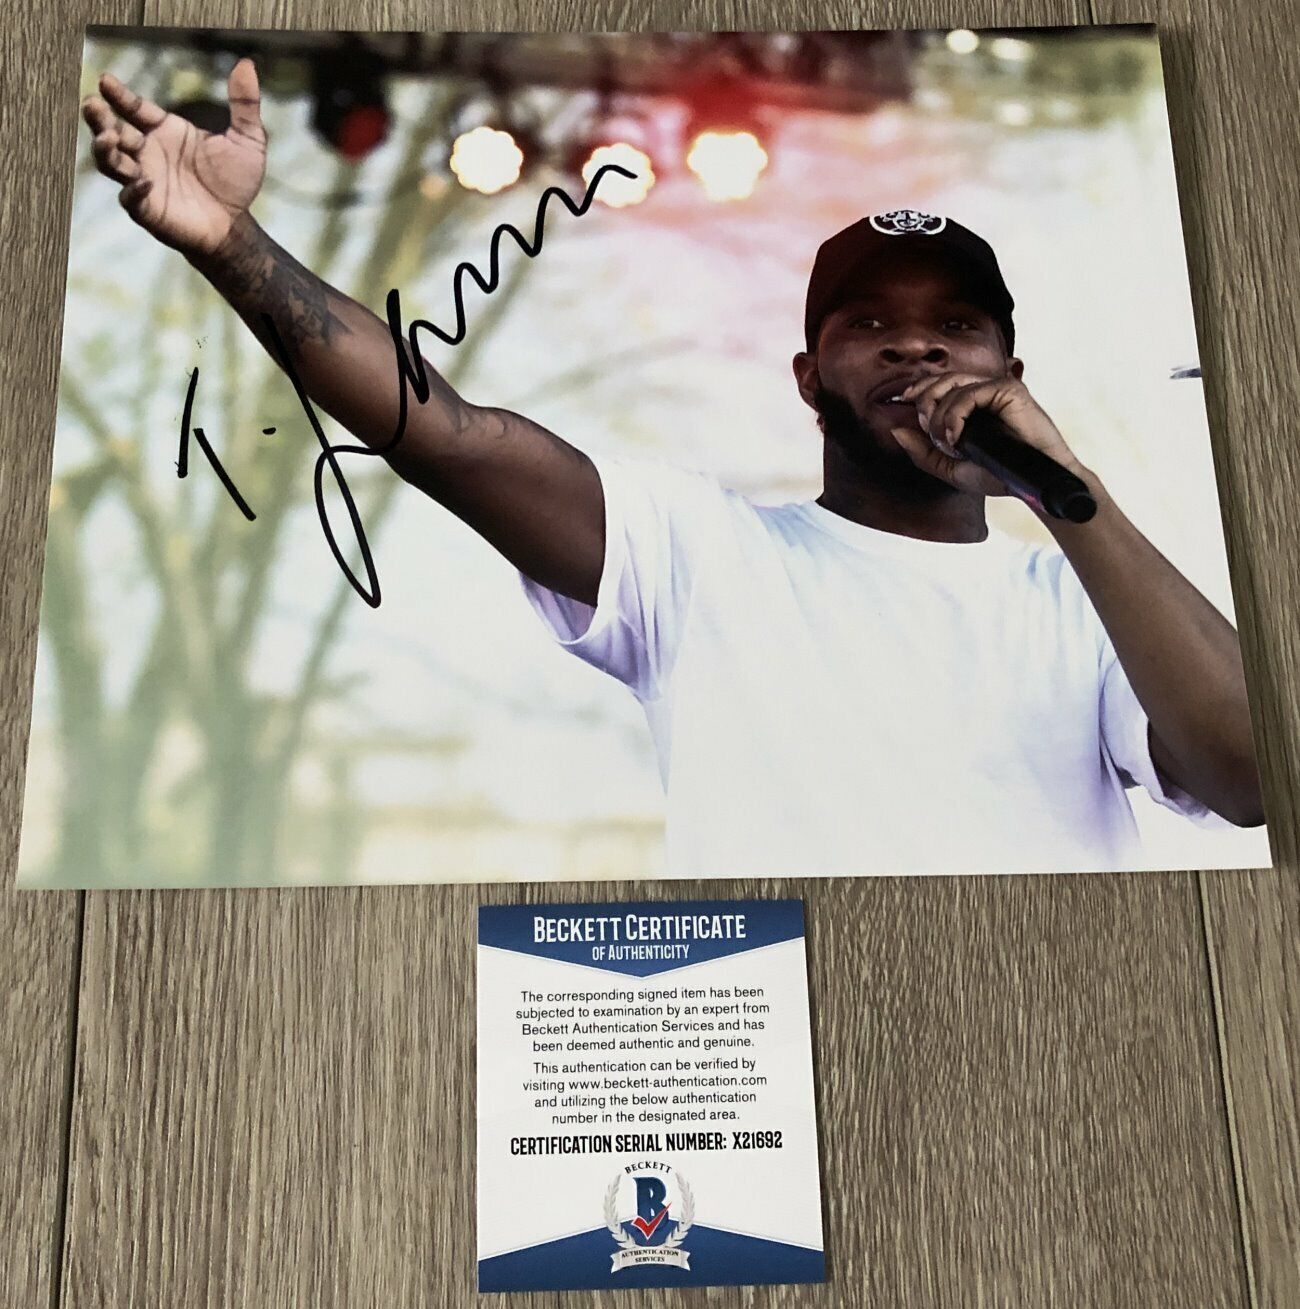 TORY LANEZ SIGNED AUTOGRAPH LONER DAYSTAR 8x10 Photo Poster painting B w/PROOF & BECKETT BAS COA